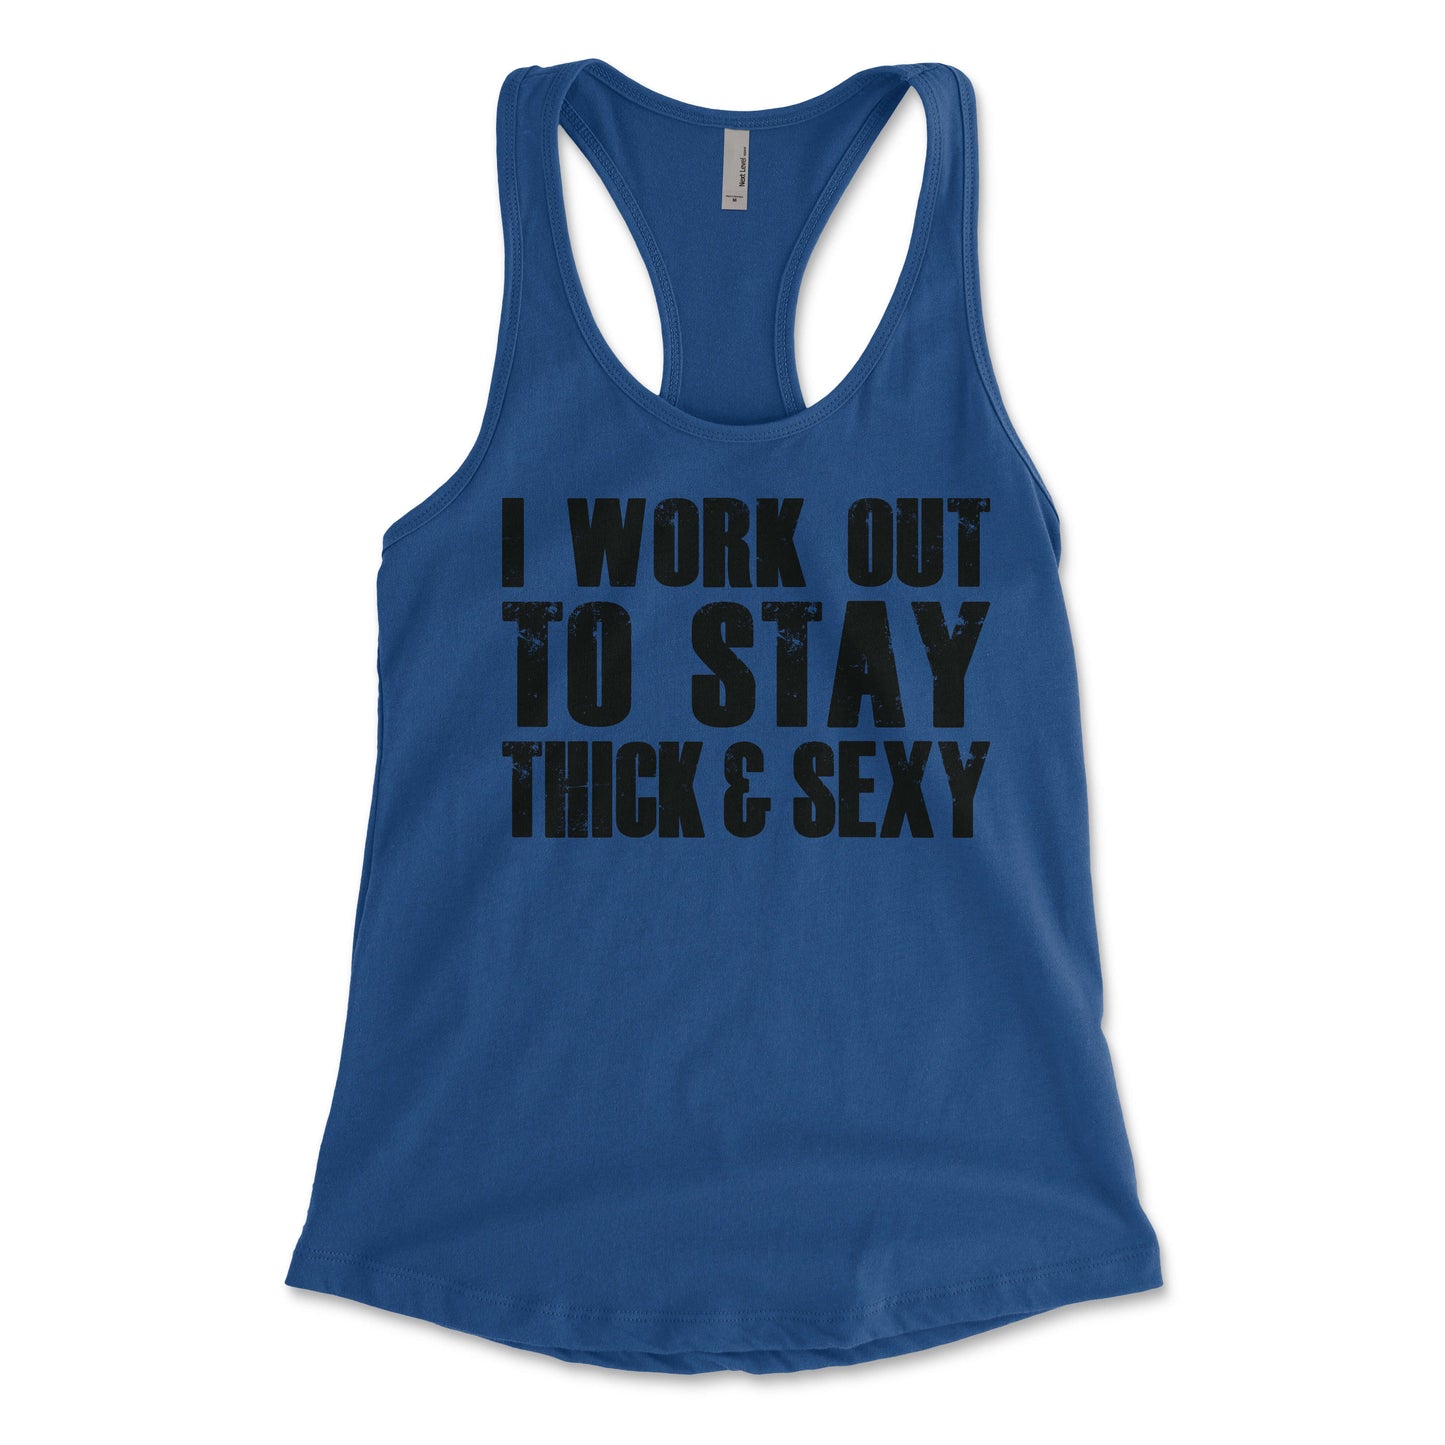 I Work Out To Stay Thick and Sexy Women's Racerback